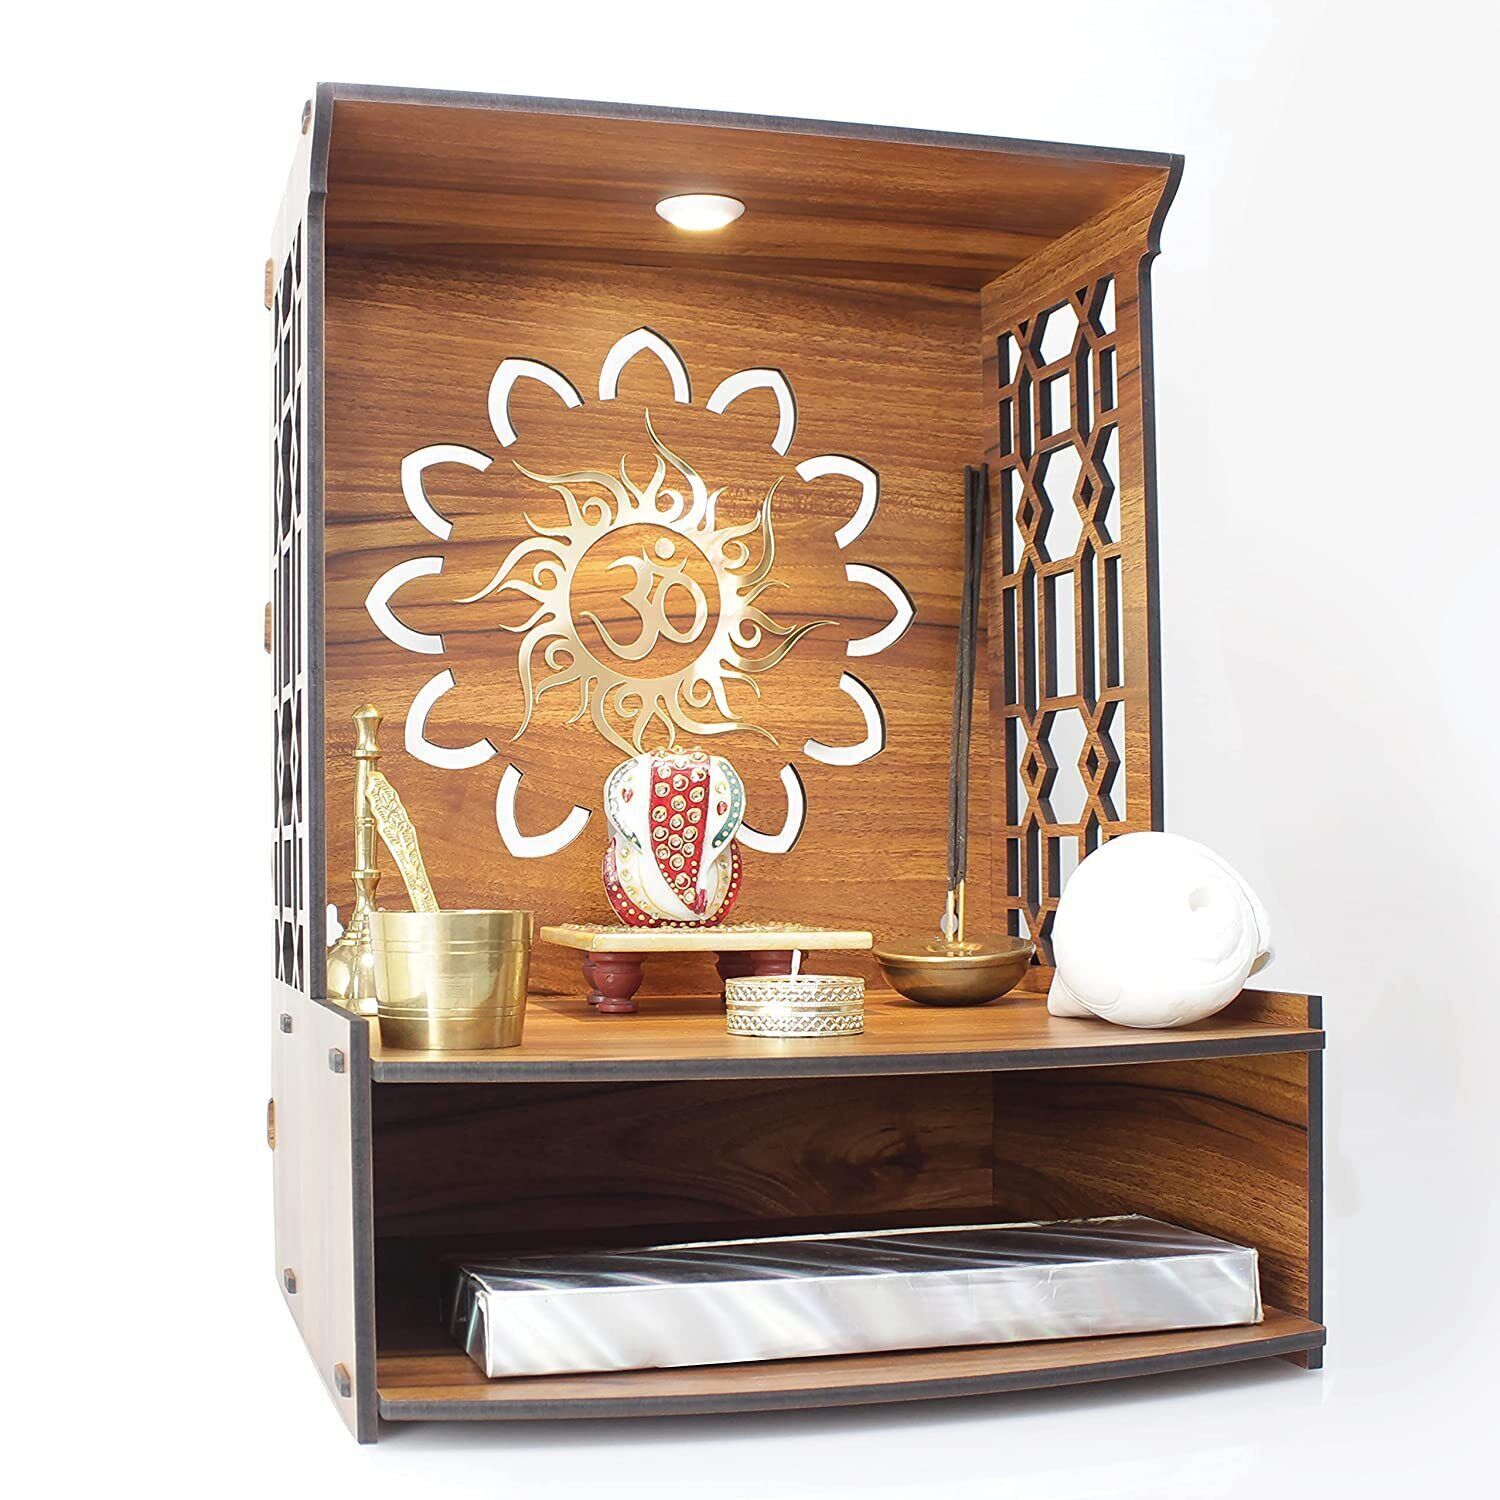 Handmade Wooden Pooja Stand with LED Spot Light for Office Temple Home Office